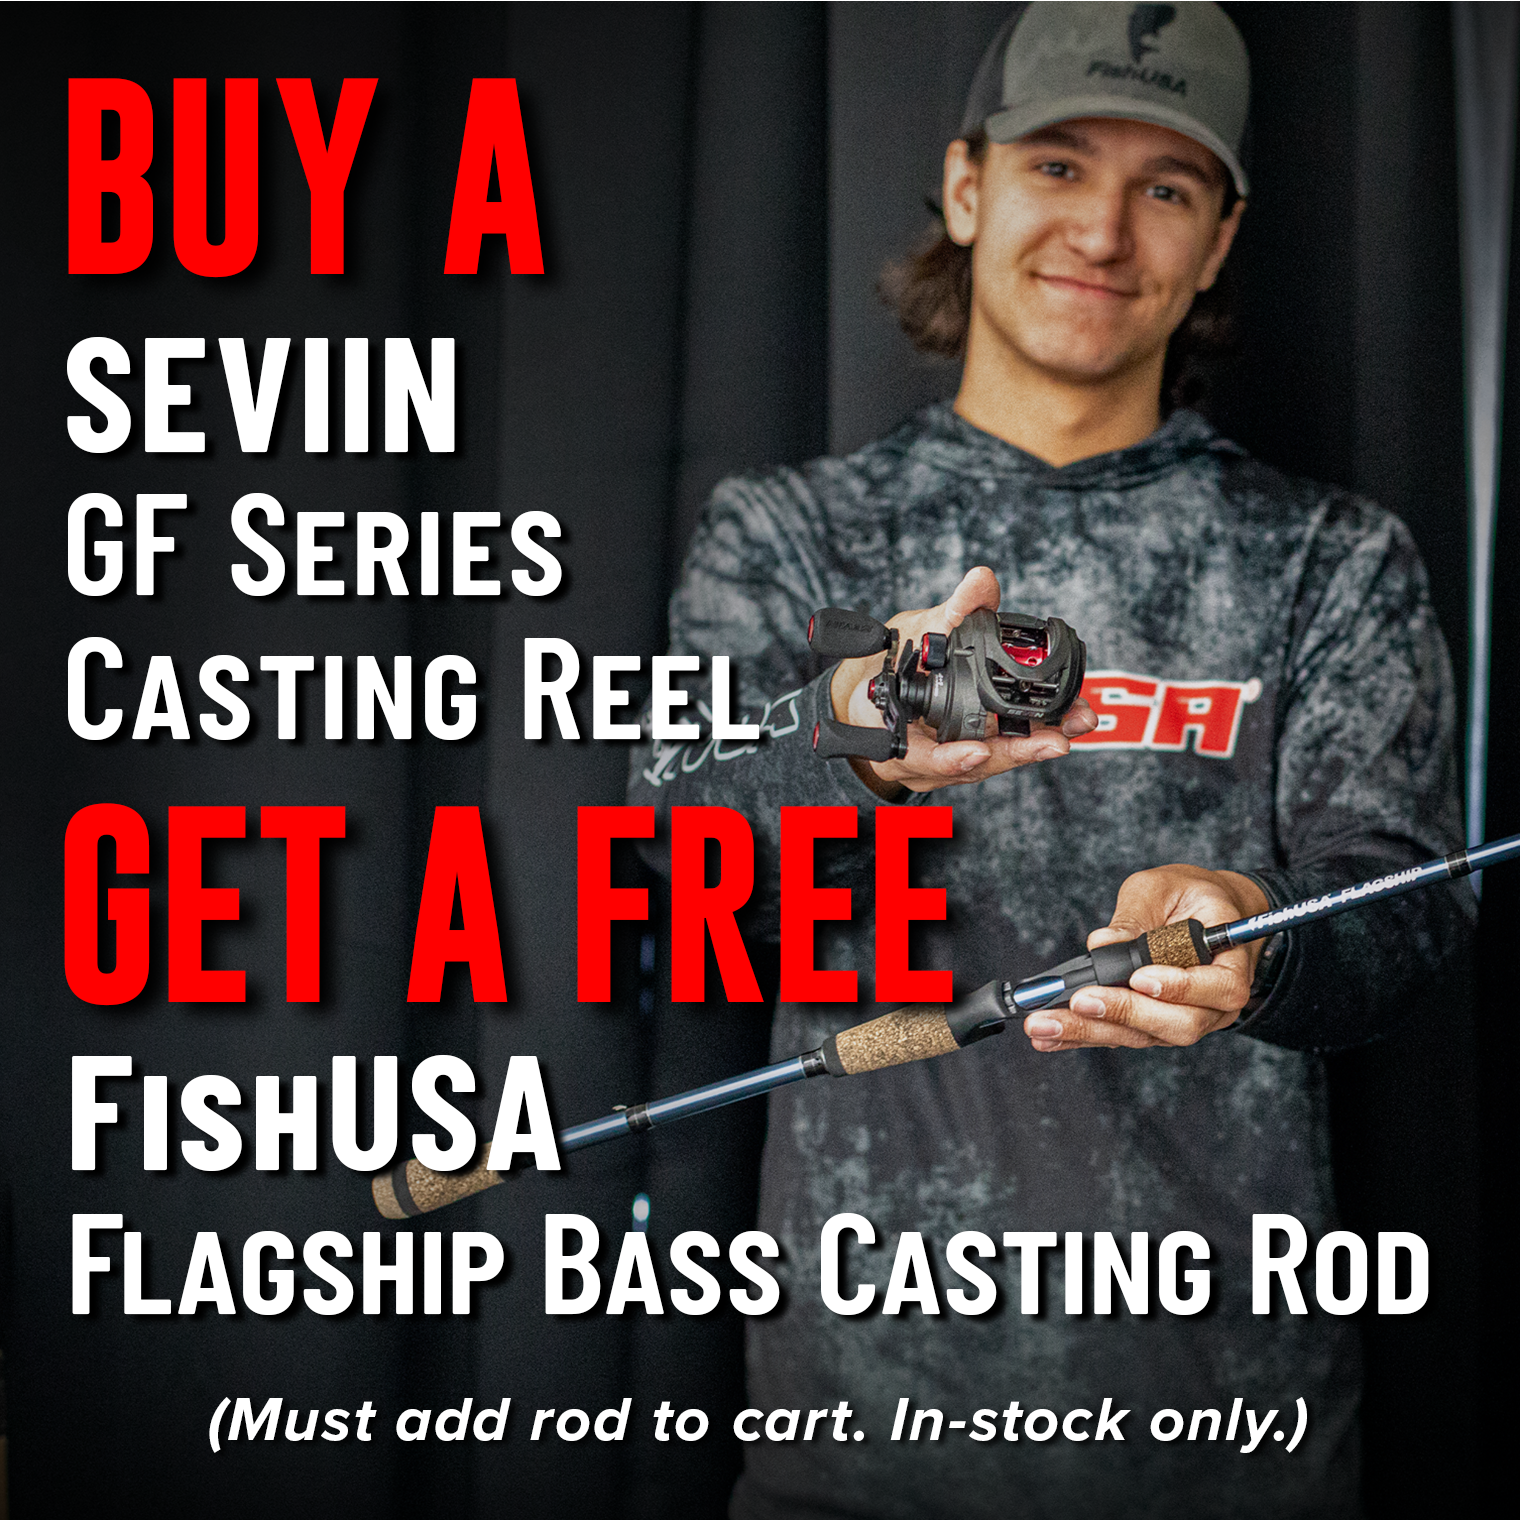 Buy a SEVIIN GF Series Casting Reel Get a Free FishUSA Flagship Bass Casting Rod (Must add rods to cart. In-stock only.)